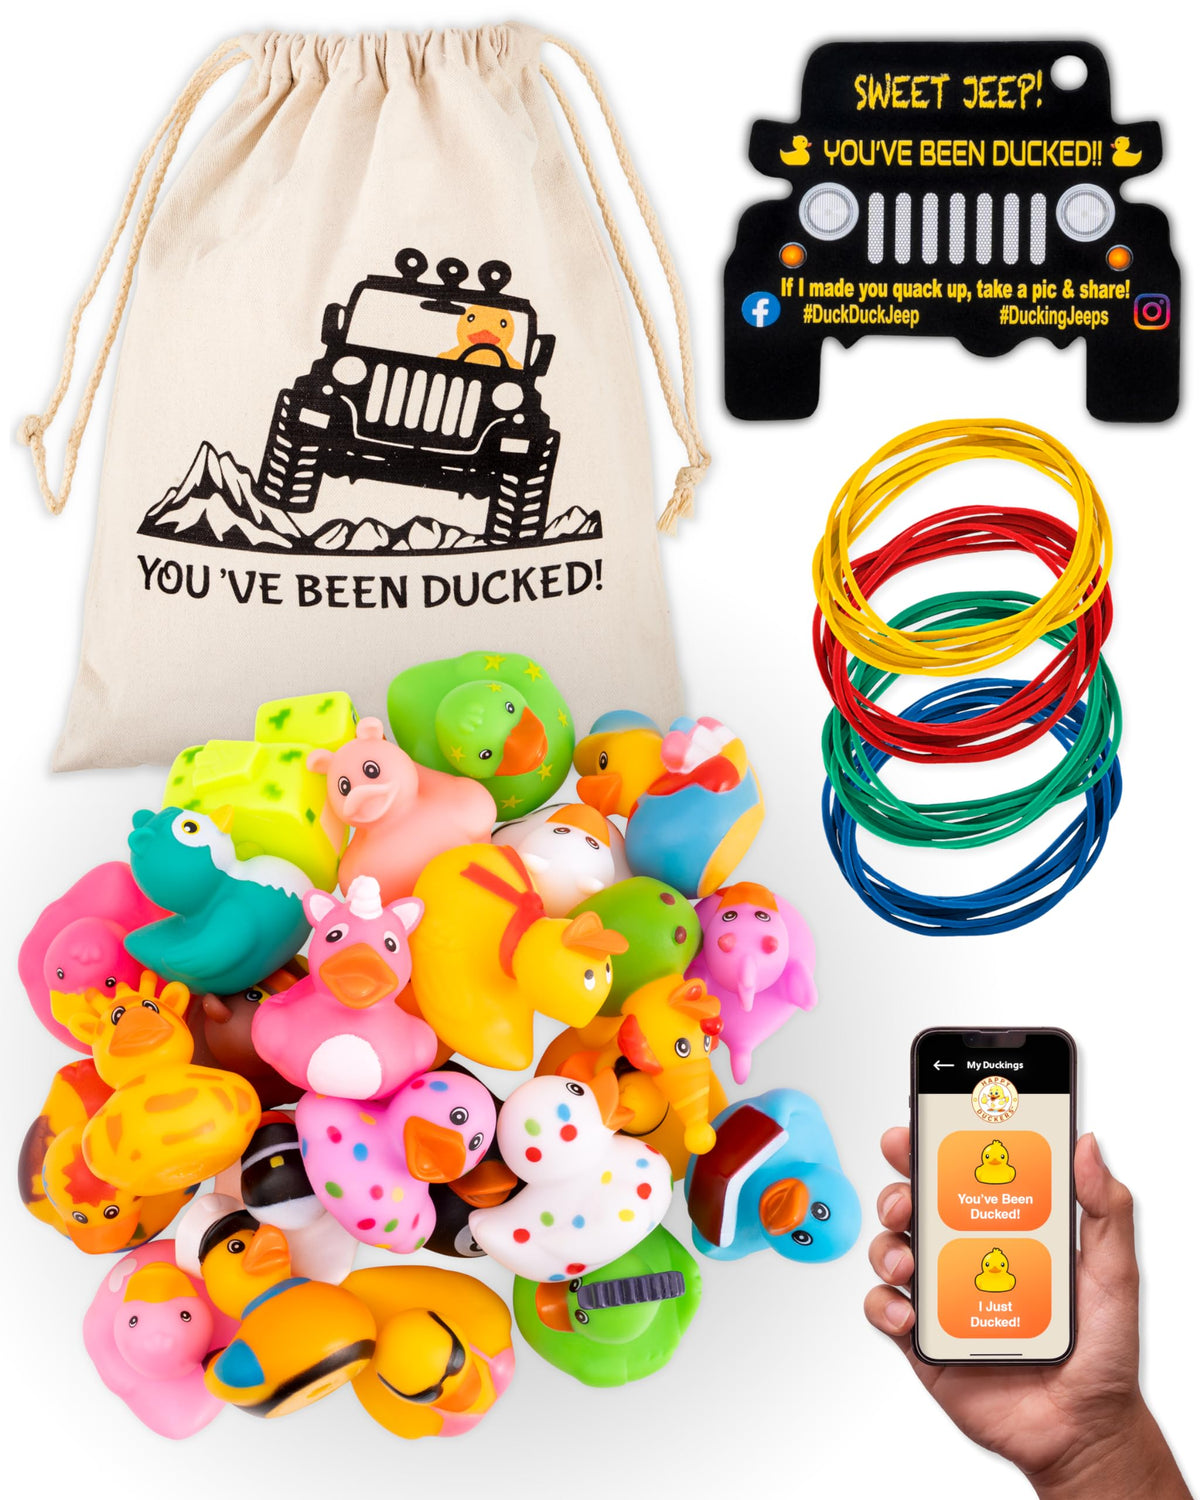 Rubber Ducks Jeep Ducking - 76 piece kit including Bag